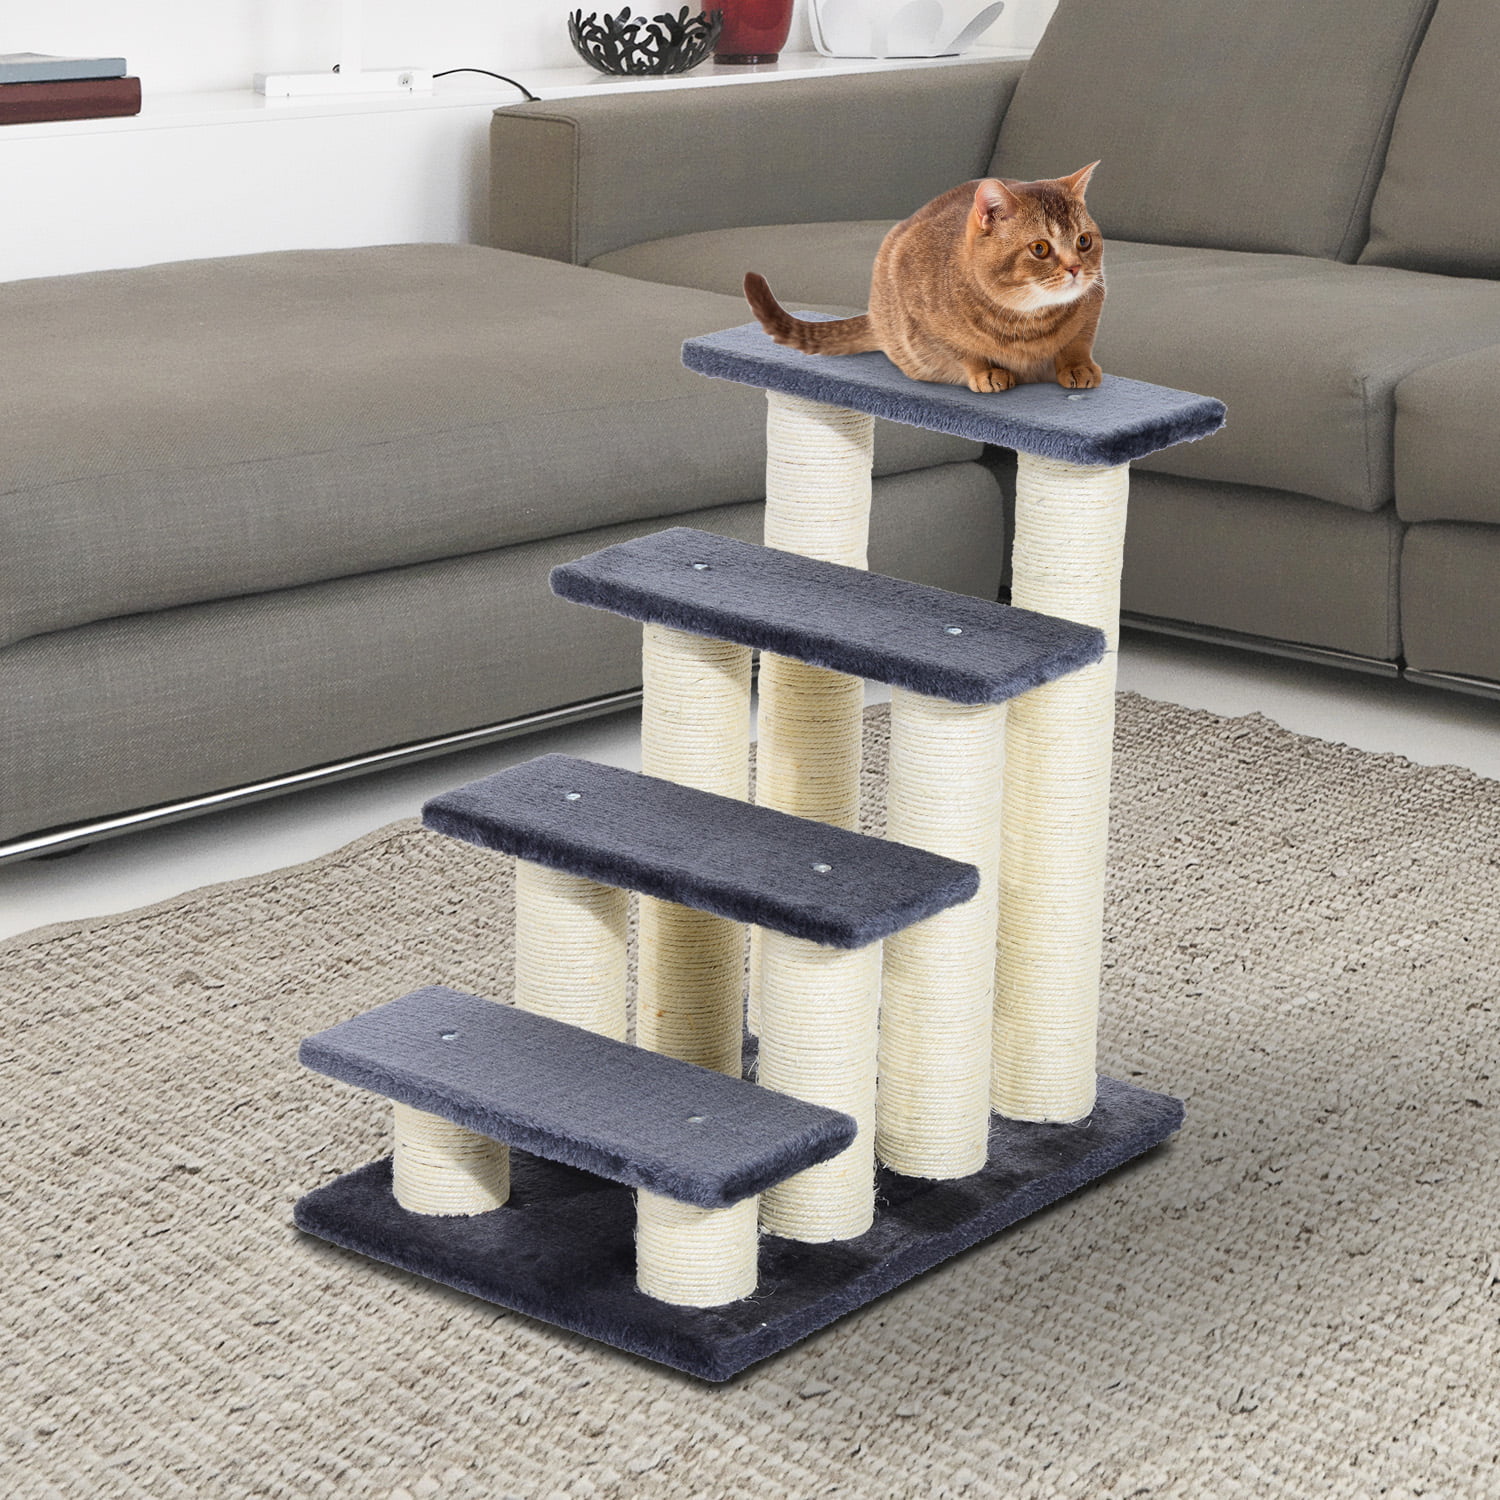 Pet Gear easy Step II Pet Stairs, 2 Step for Cats/Dogs up to 150 pounds.